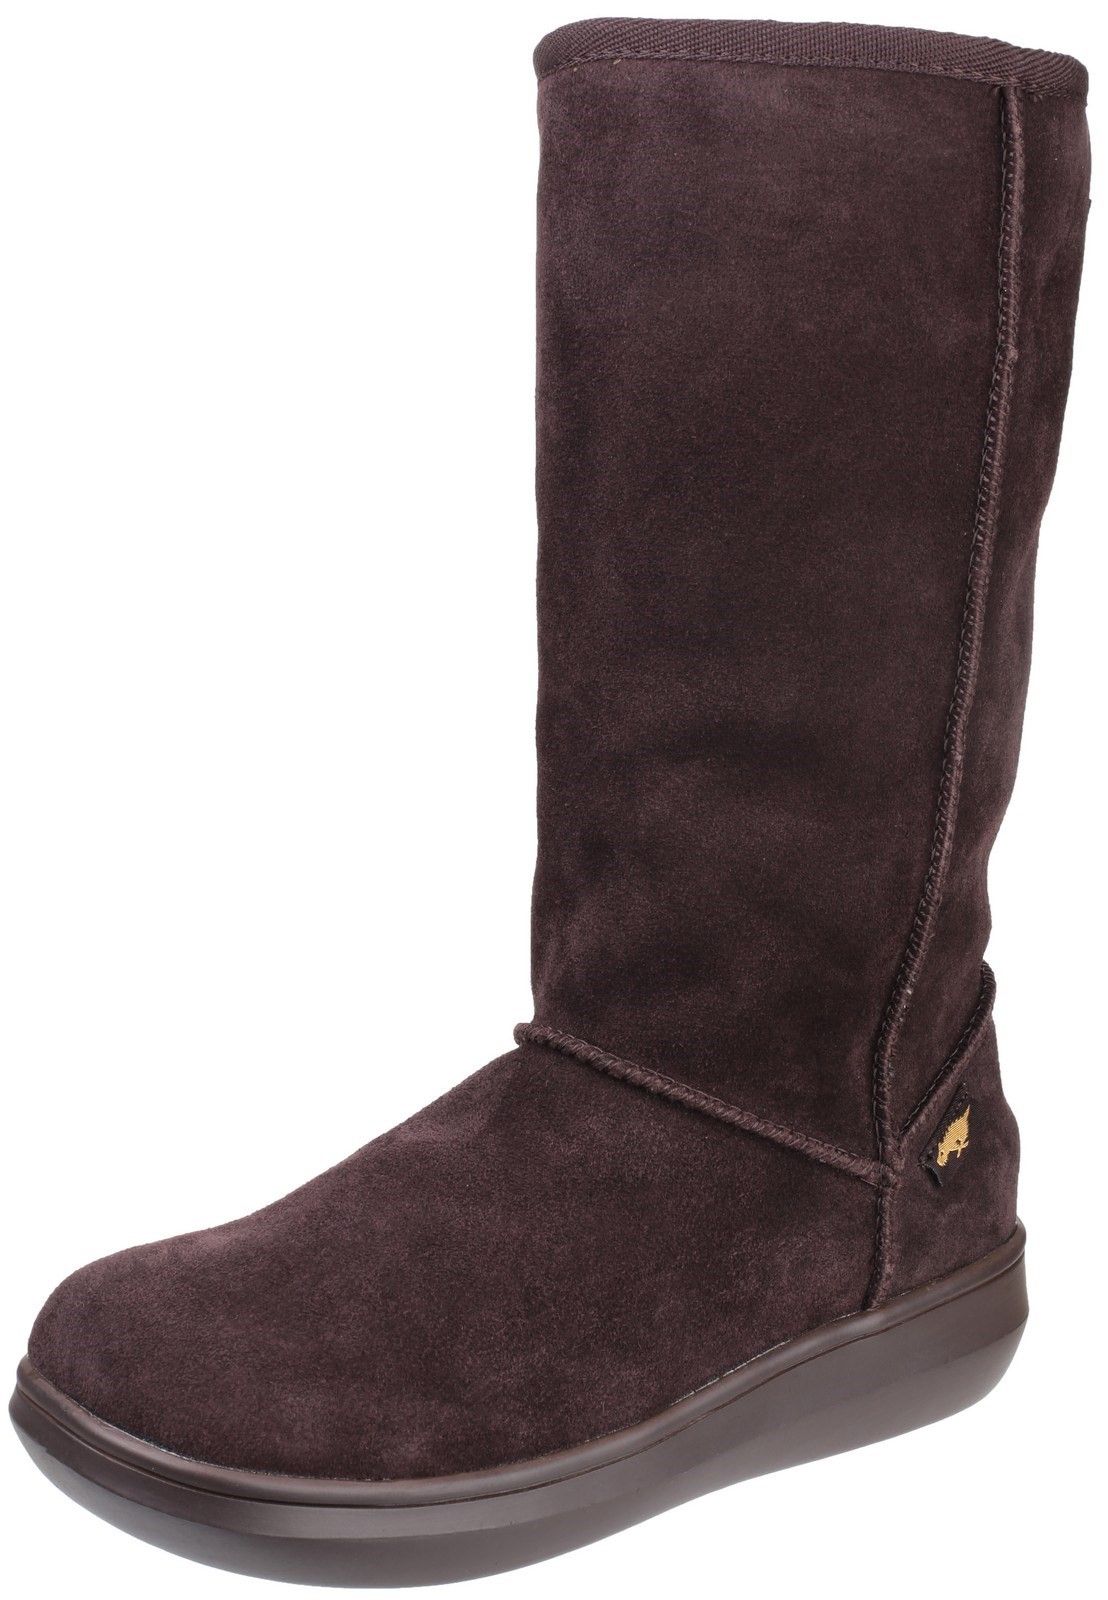 Sugar Daddy - the boot we all love! Soft and stylish suede upper that makes this boot good to look at, whilst a faux shearling lining adds great comfort whilst being worn. This pull on boot style is always a hit each winter. Stylish suede upper. 
Faux shearling, textile lining for a soft touch when being worn. 
Durable and flexible rubber sole.